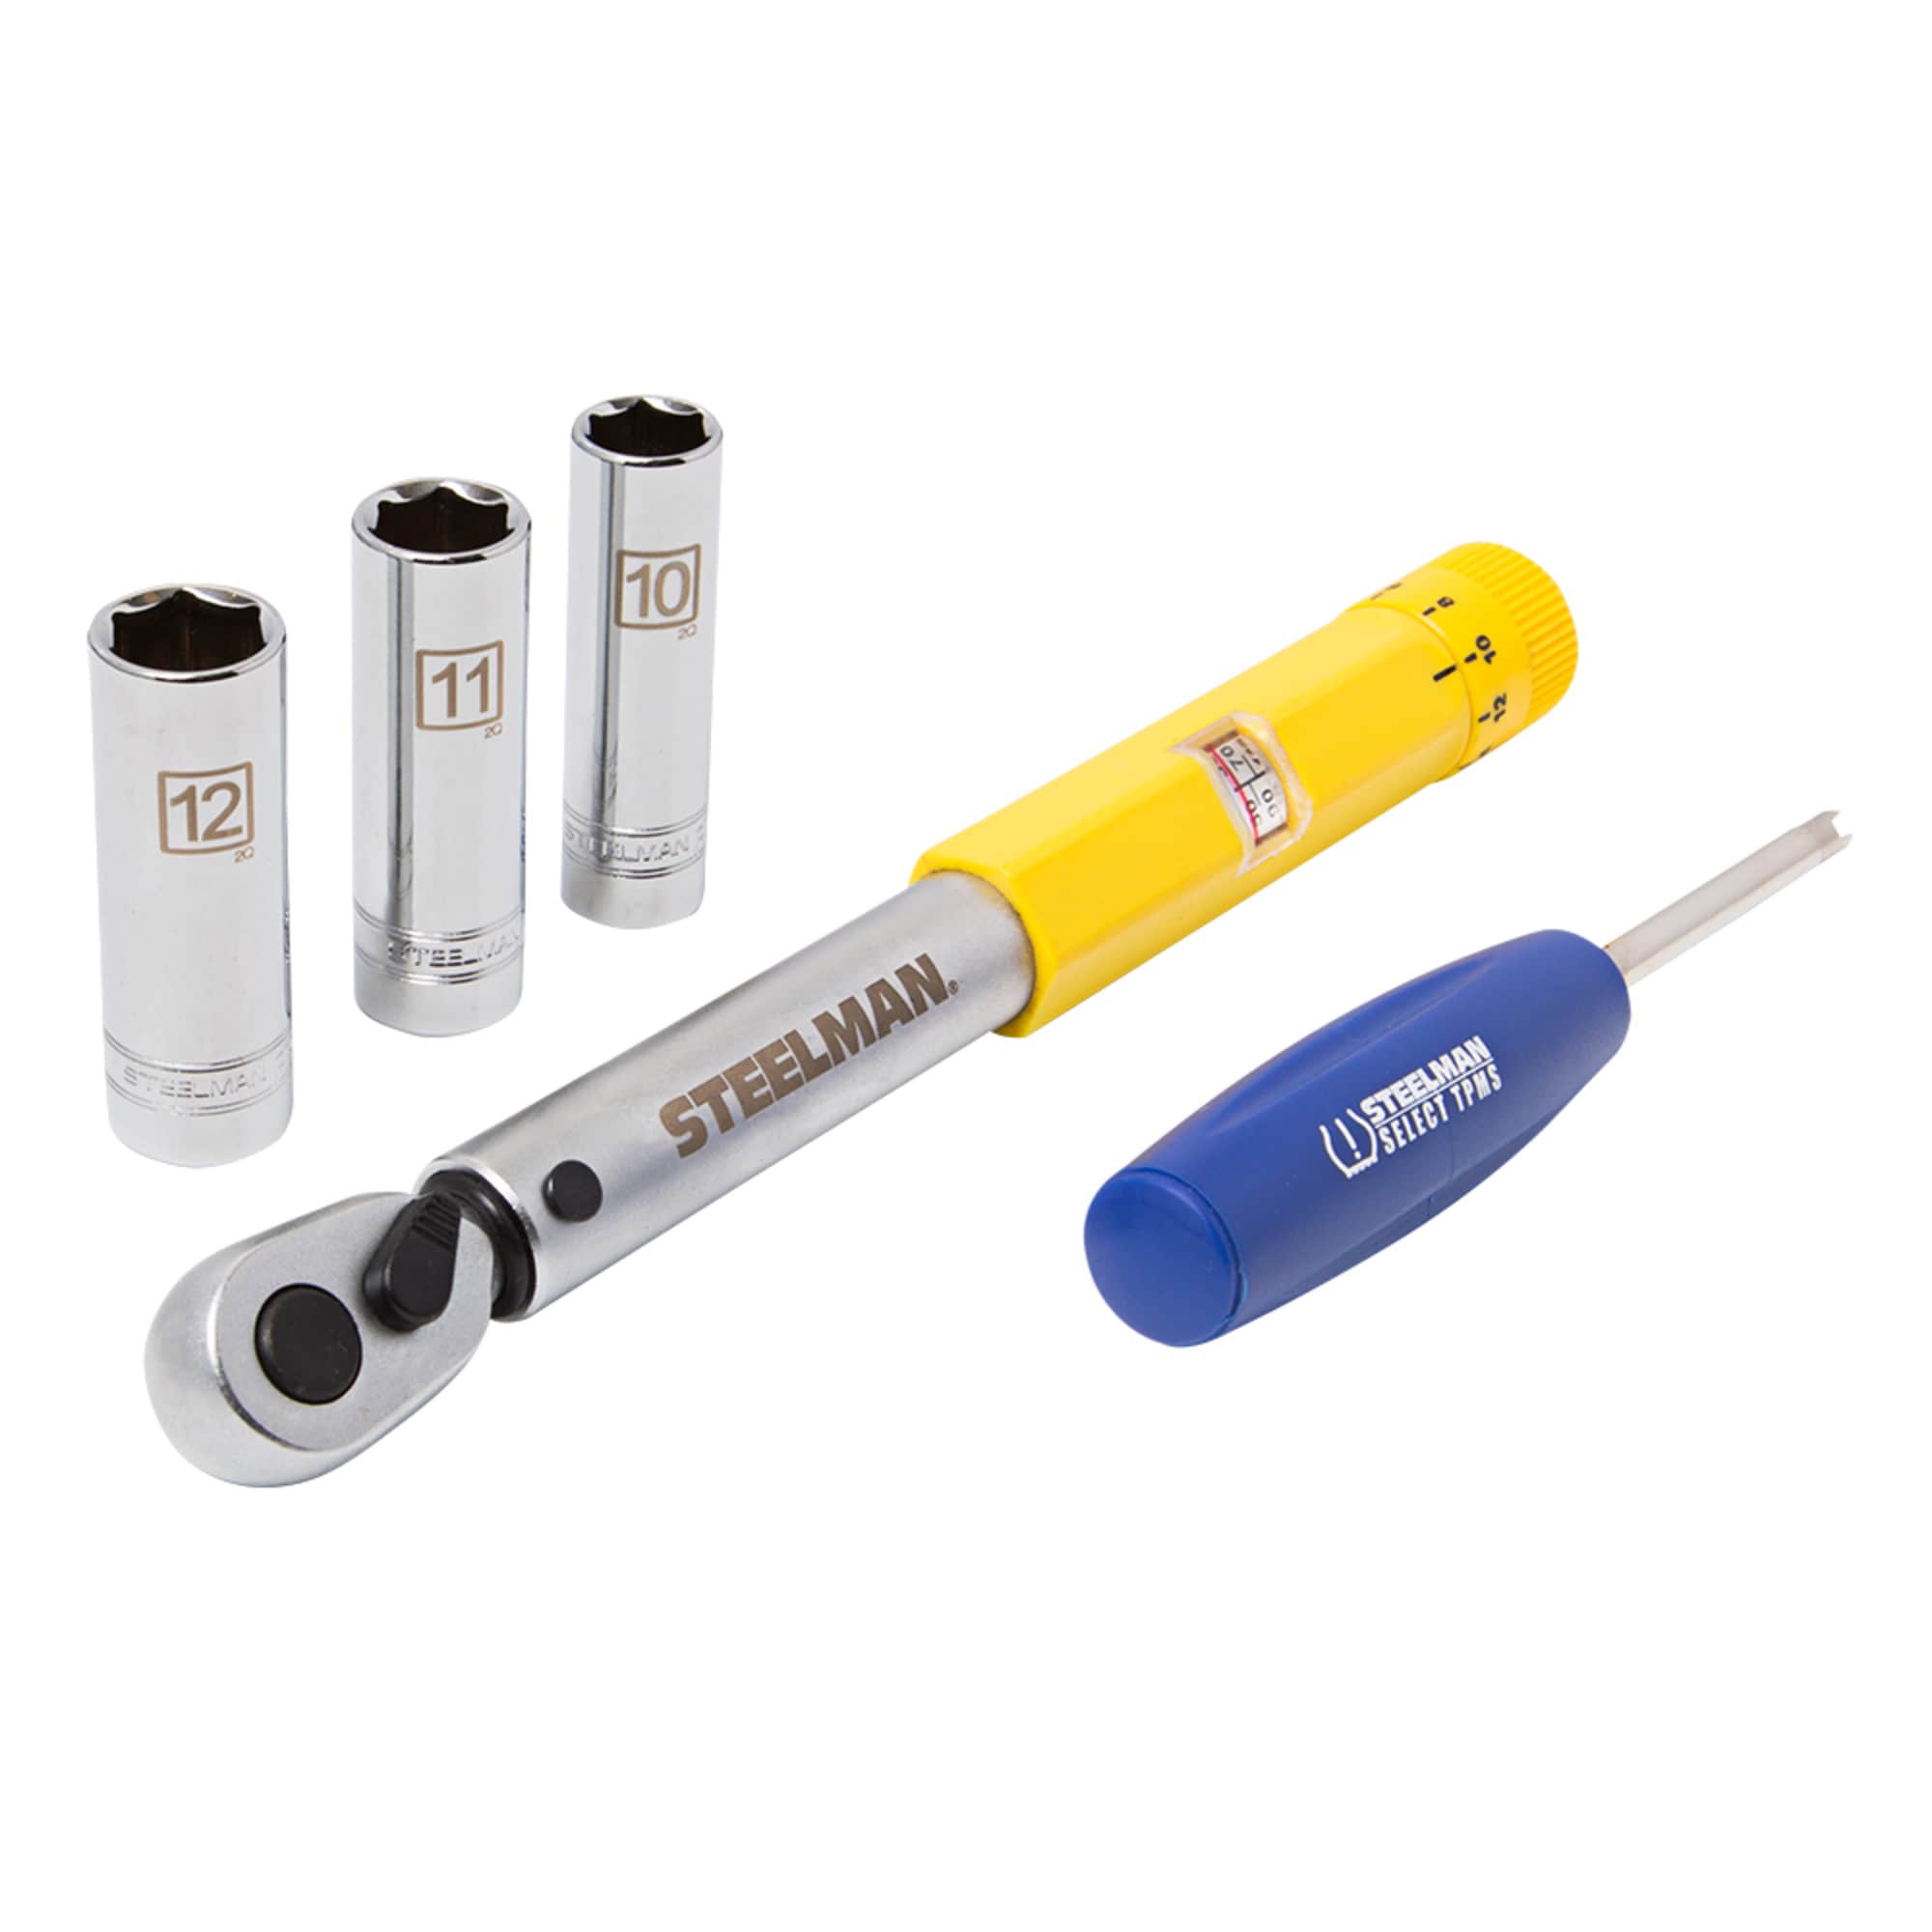 STEELMAN Tire Marking Crayon(s) in the Tire Repair Tools department at